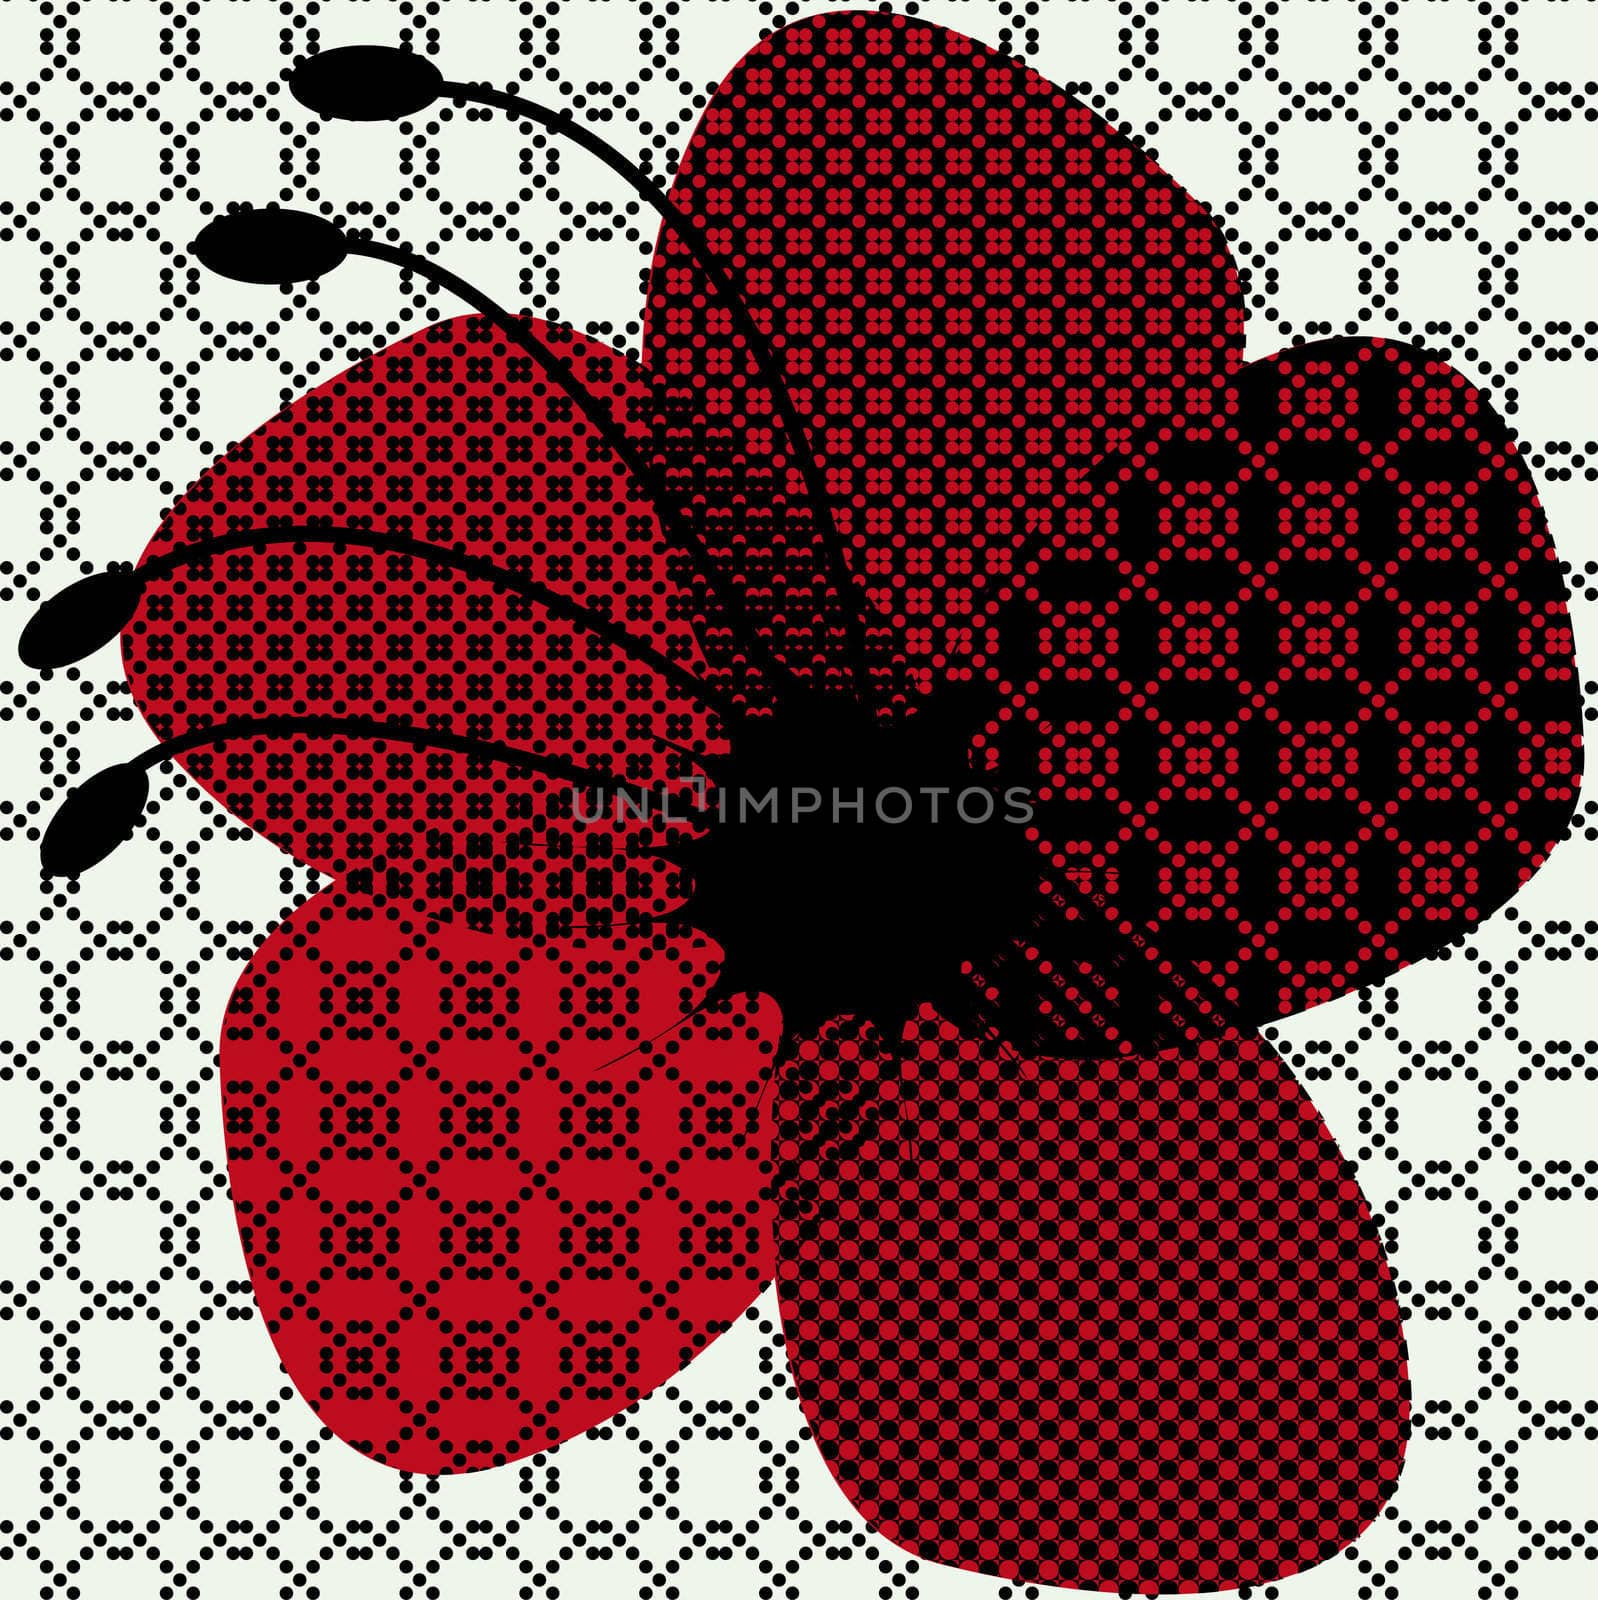 halftone flower by karinclaus